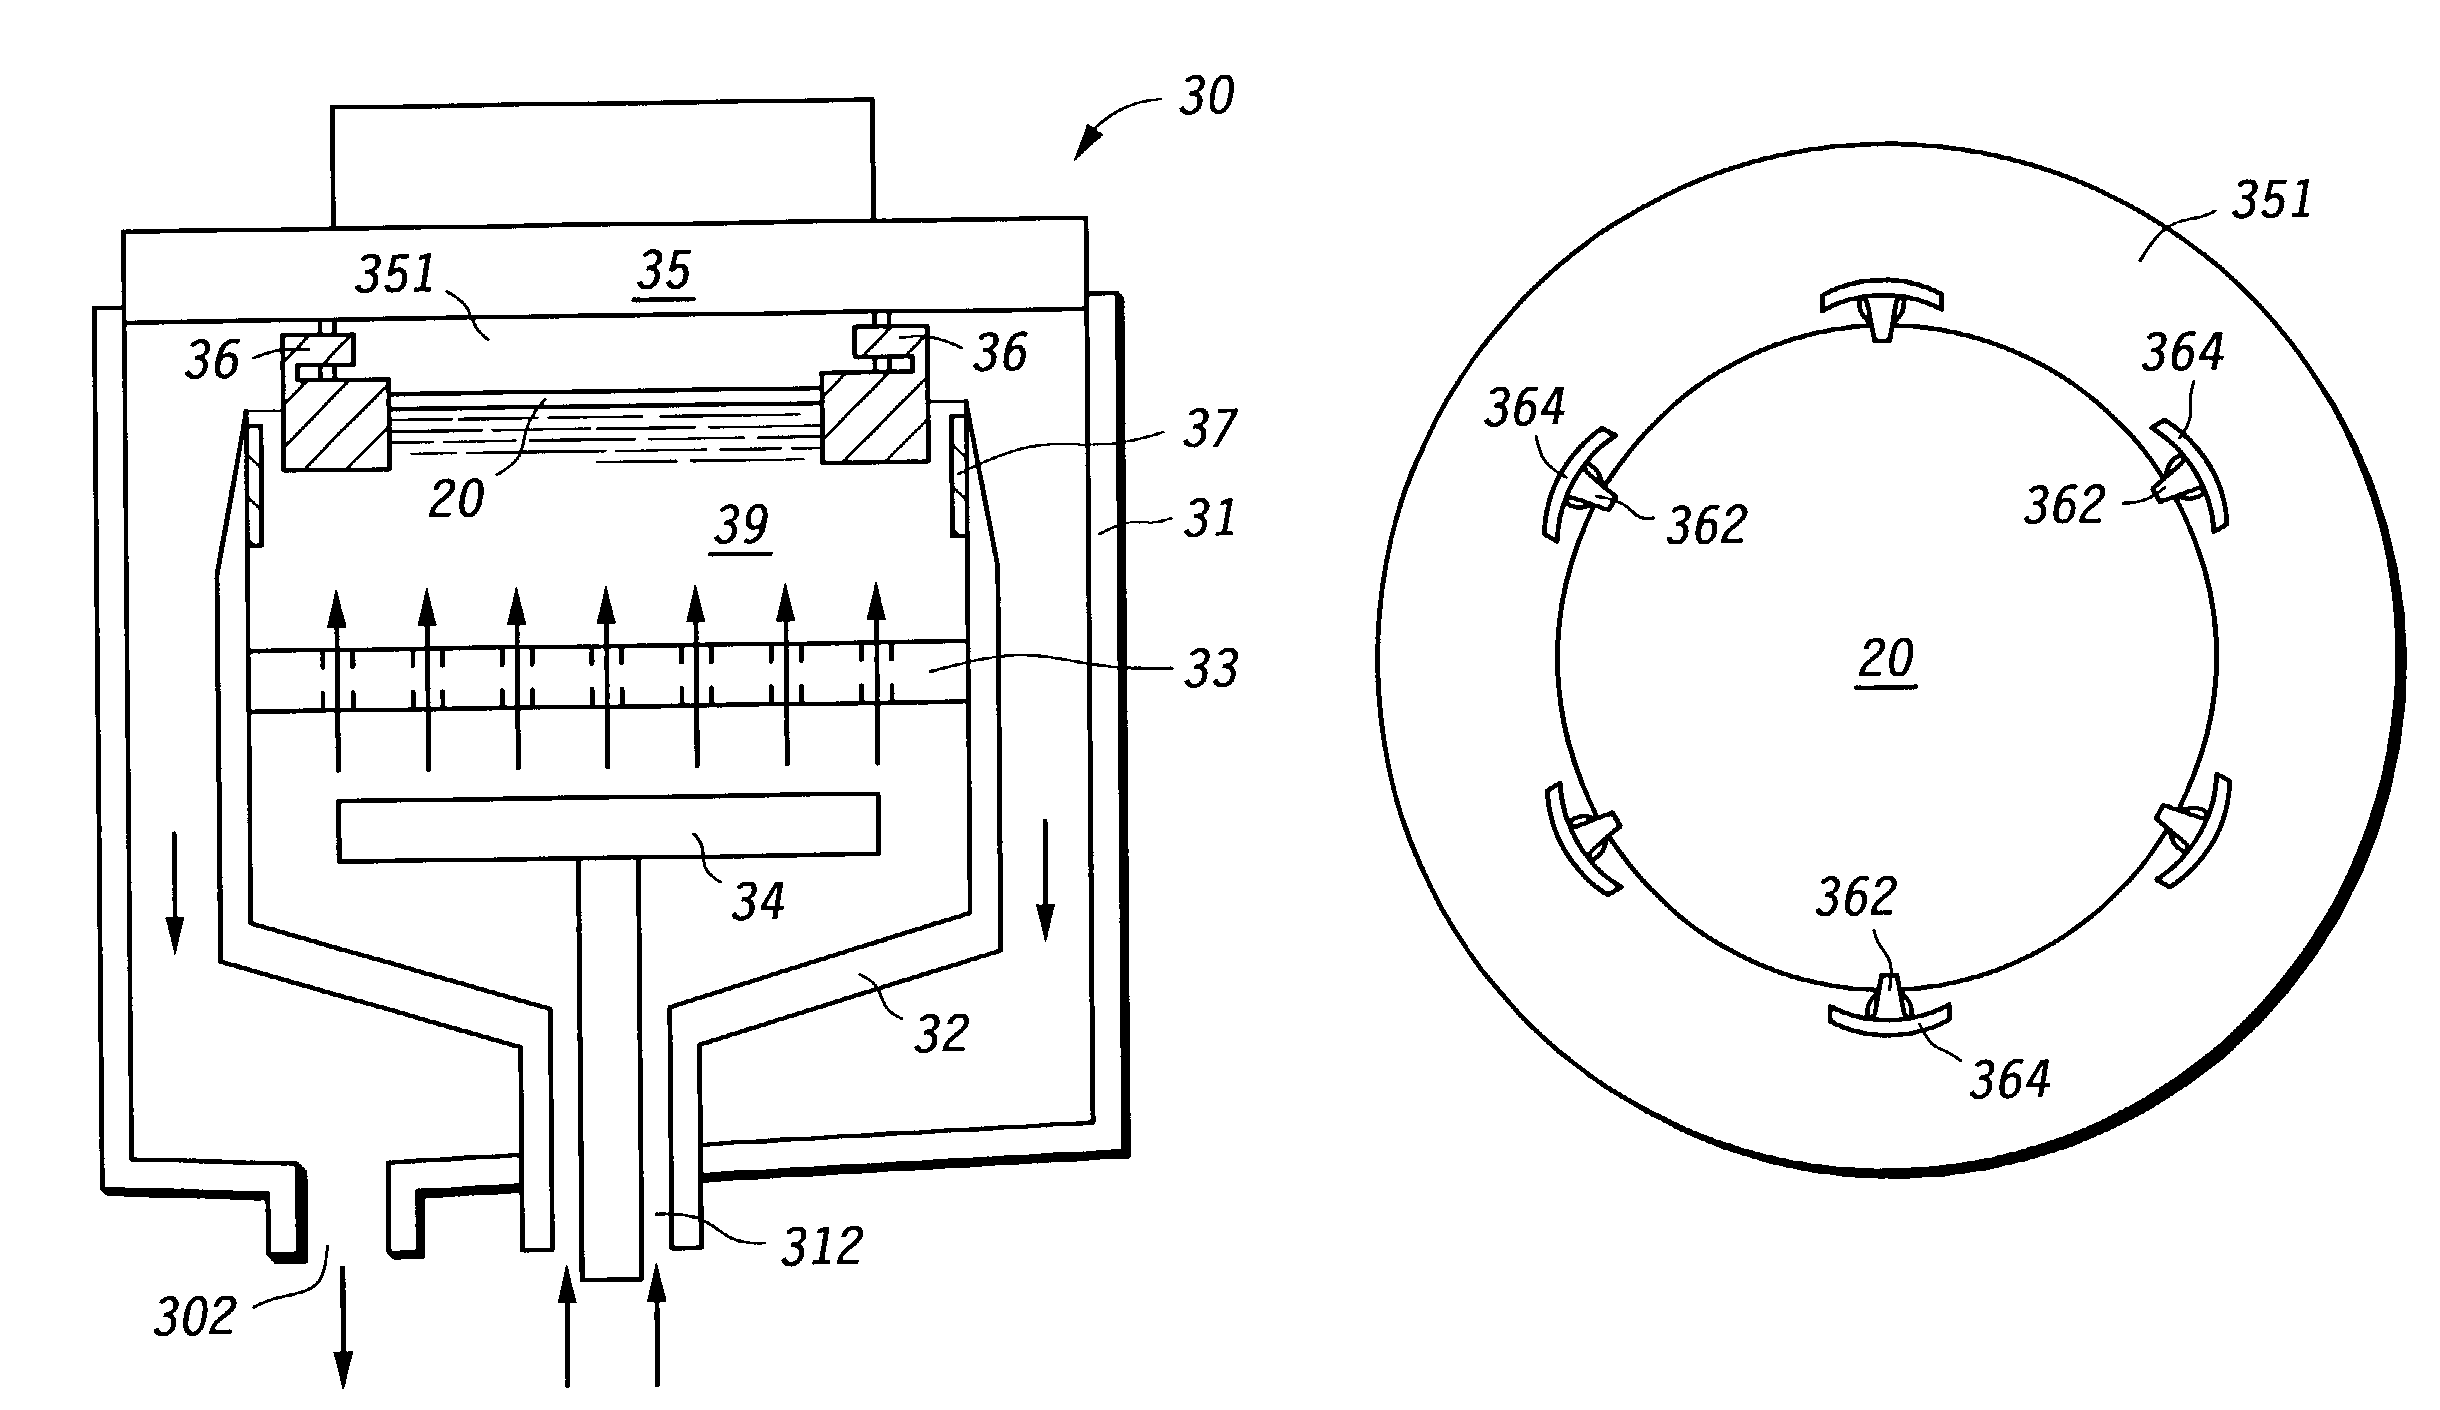 Process for depositing a layer of material on a substrate